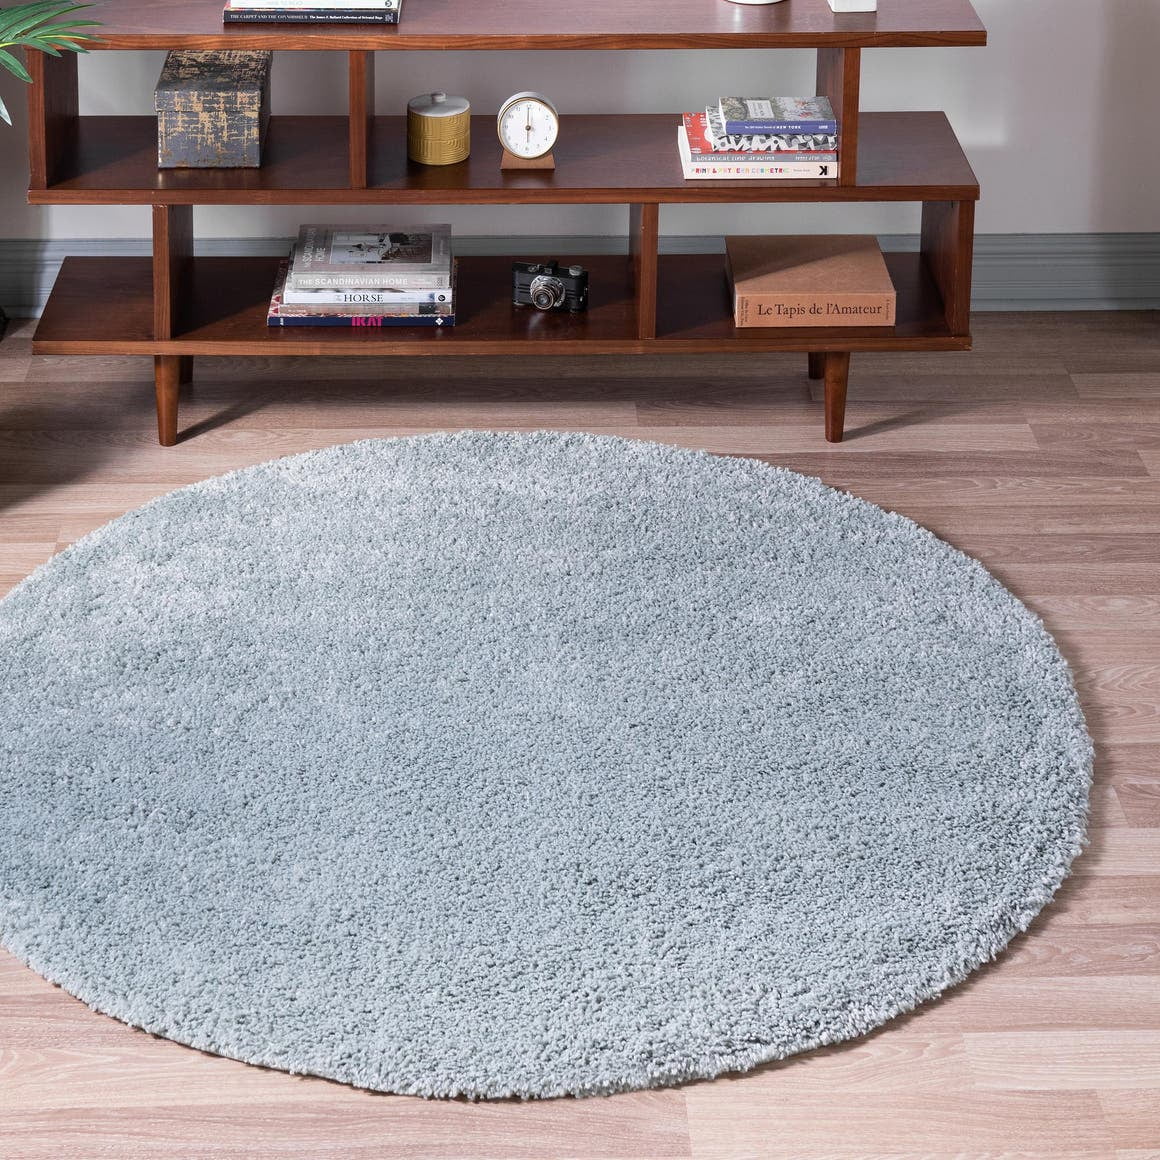 Rugscom Soft Solid Shag Collection Round Rug 4 Ft Round Green Shag